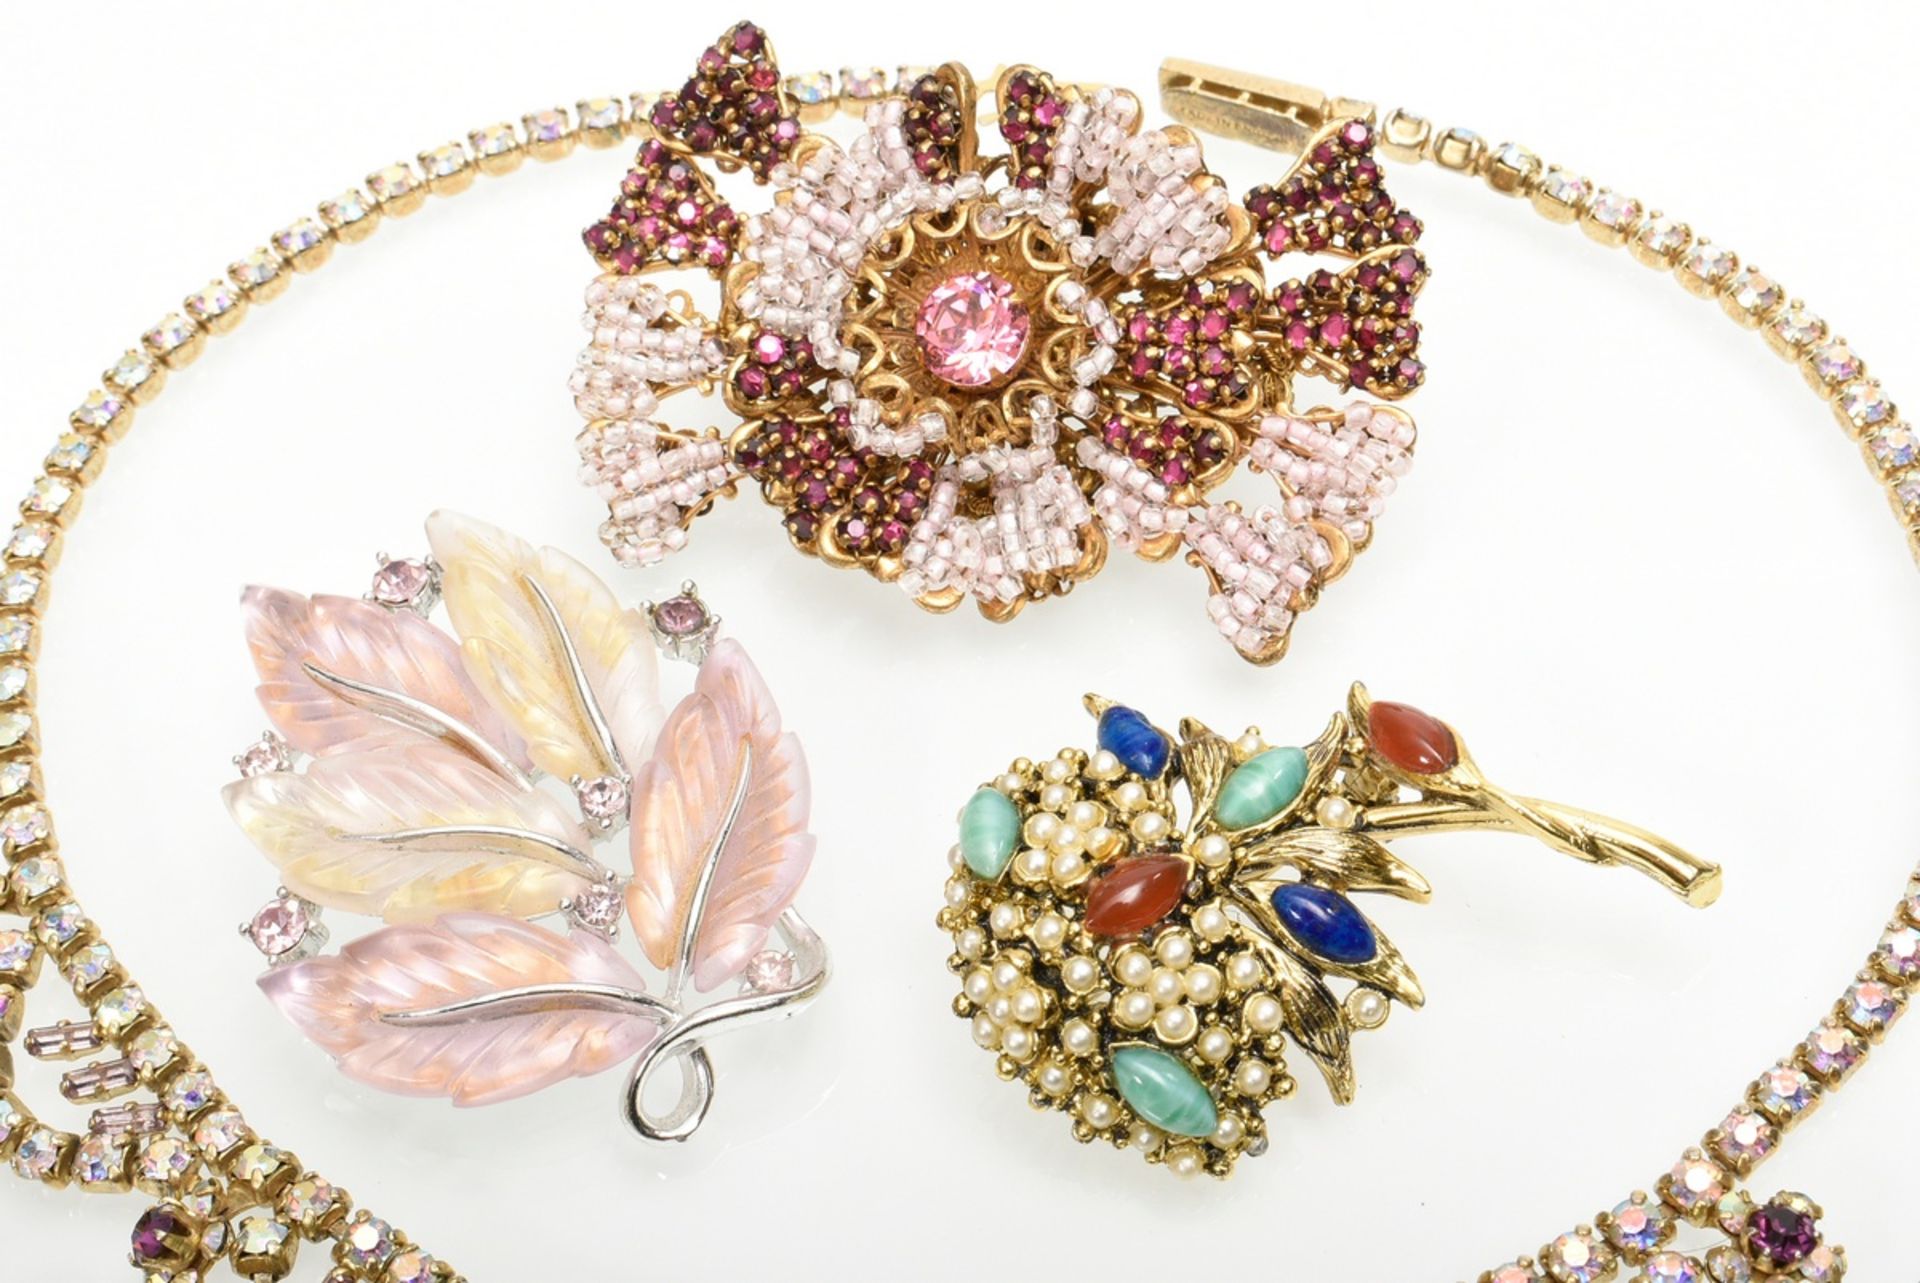 6 pieces of vintage costume jewellery with glass beads and rhinestones in white metal and gold plat - Image 5 of 18